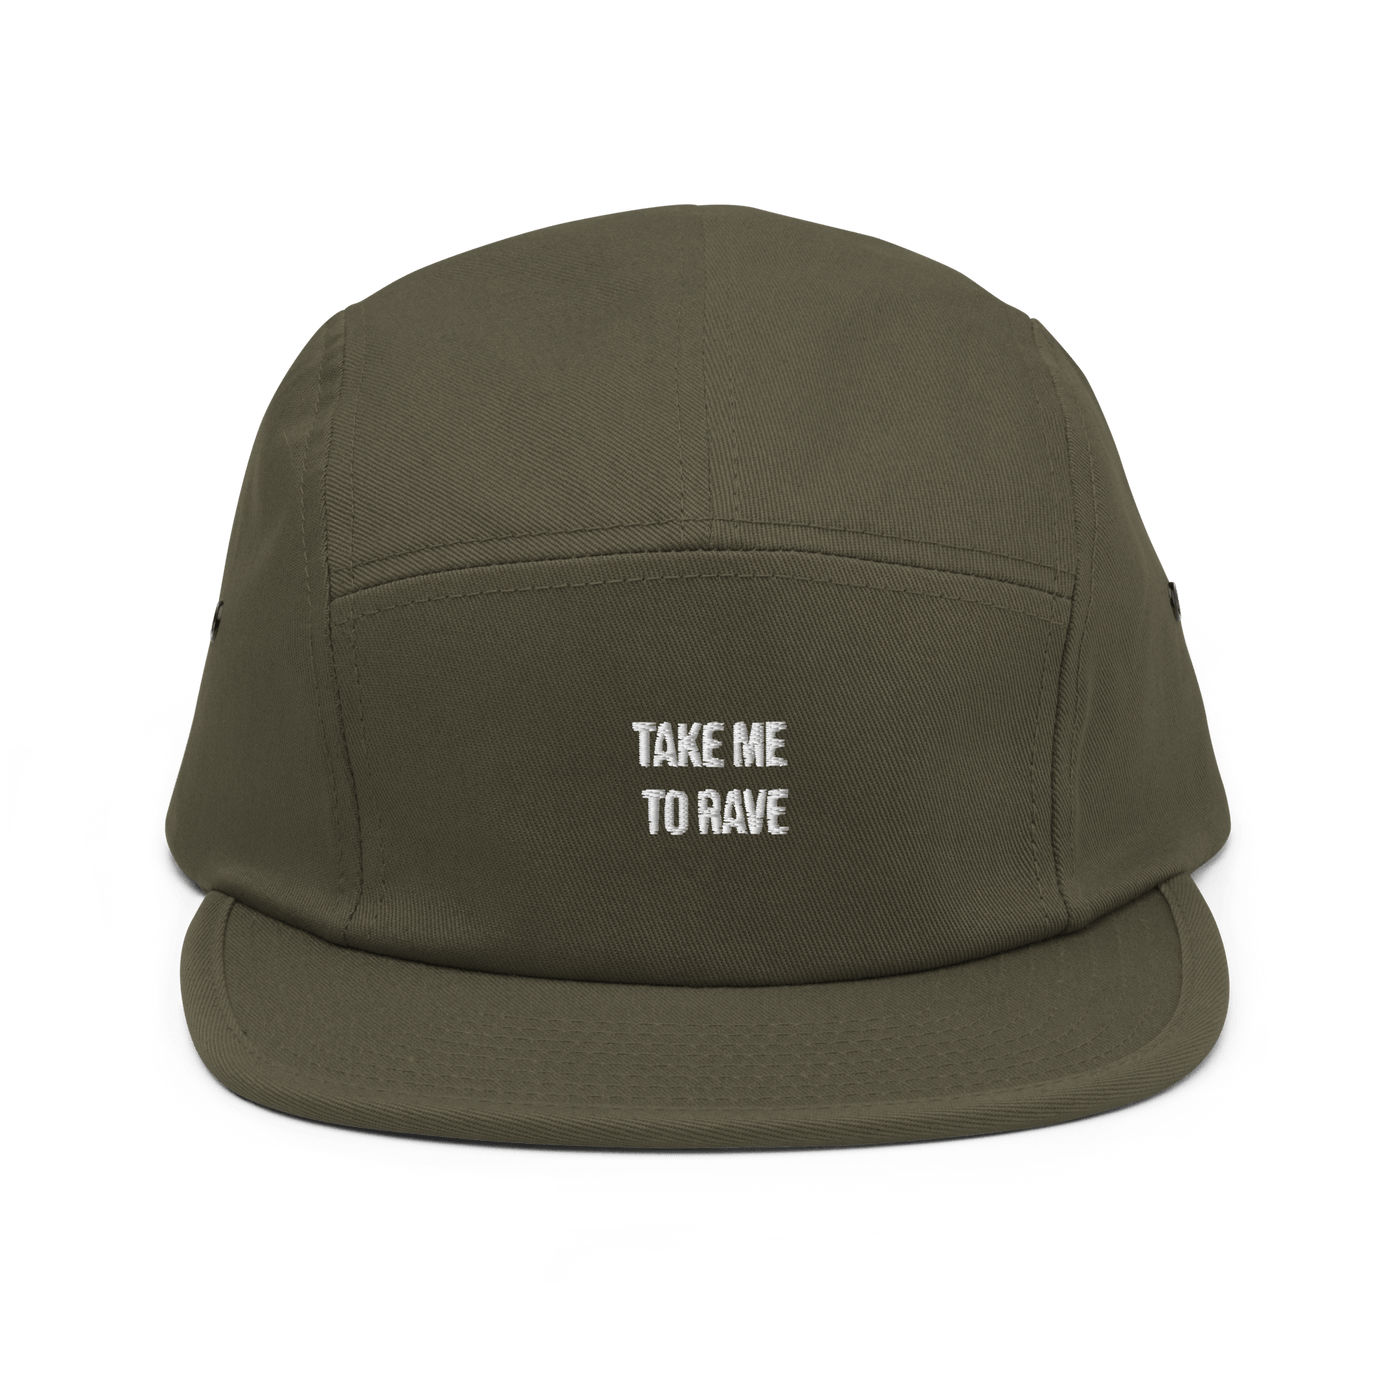 Take me to rave Five Panel Cap - Navy - - Just Another Cap Store